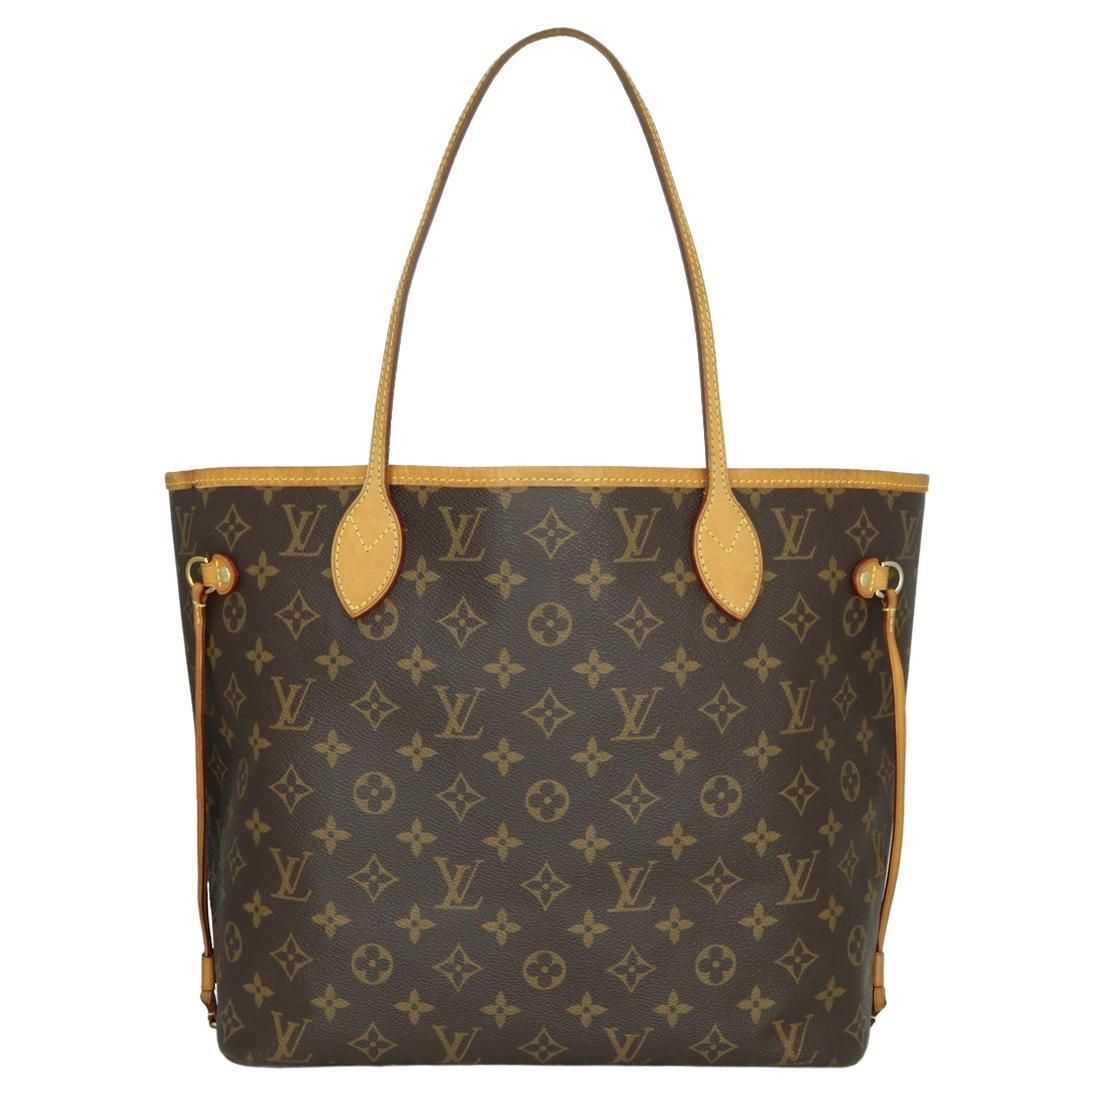 Louis Vuitton Neverfull MM Bag in Monogram with Beige Interior 2017 For Sale